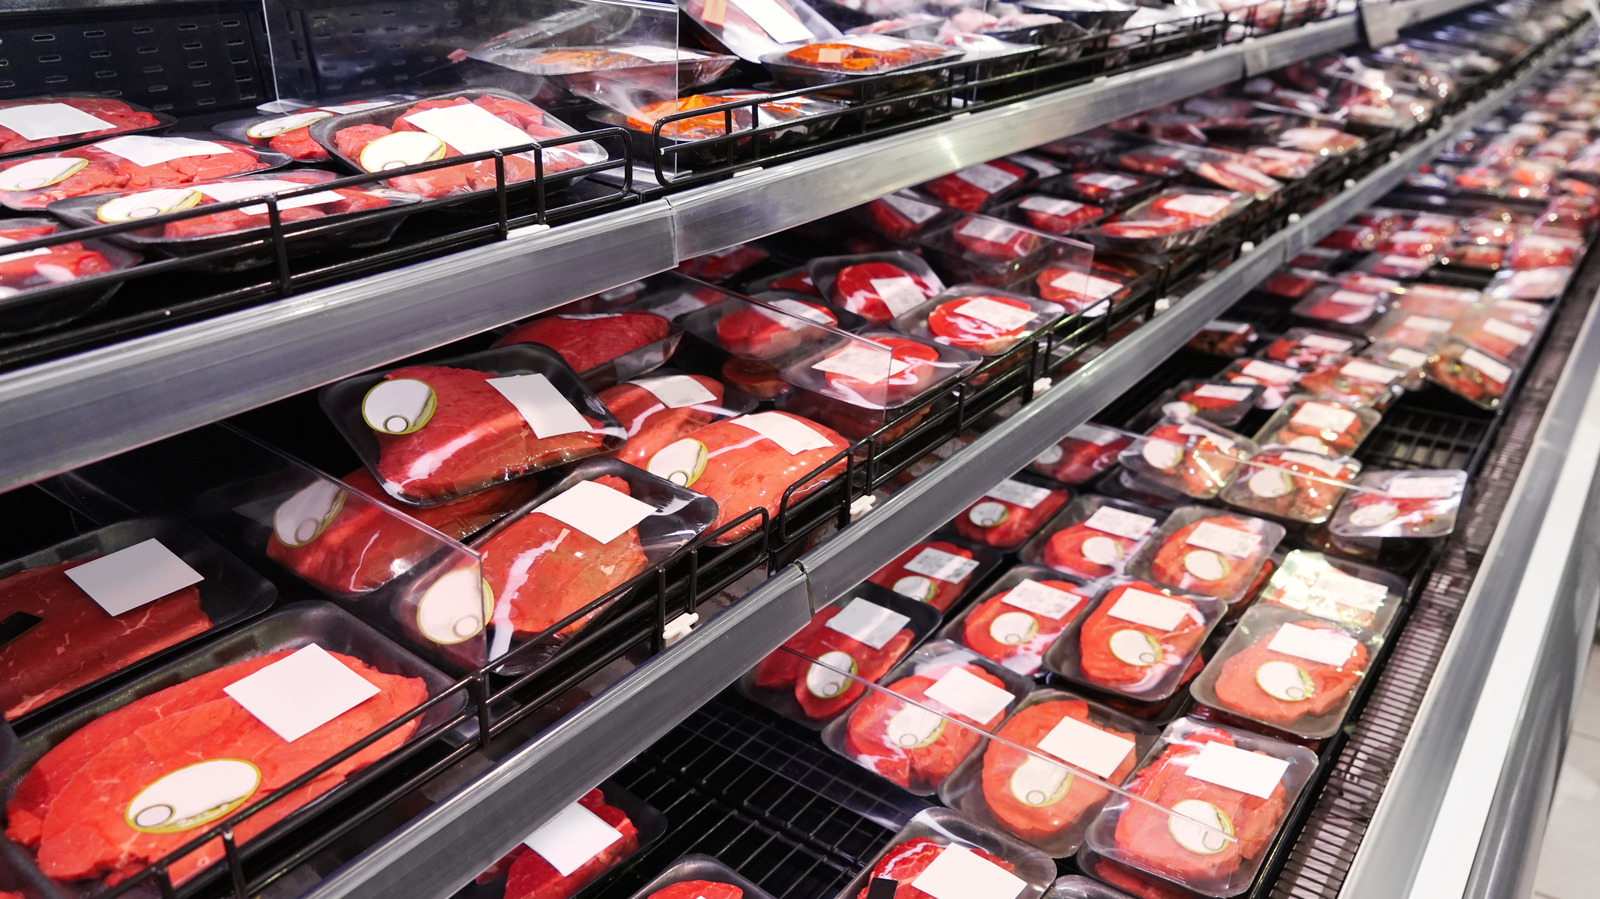 14 Popular Chain Grocery Stores For Meat, Ranked Worst To Best